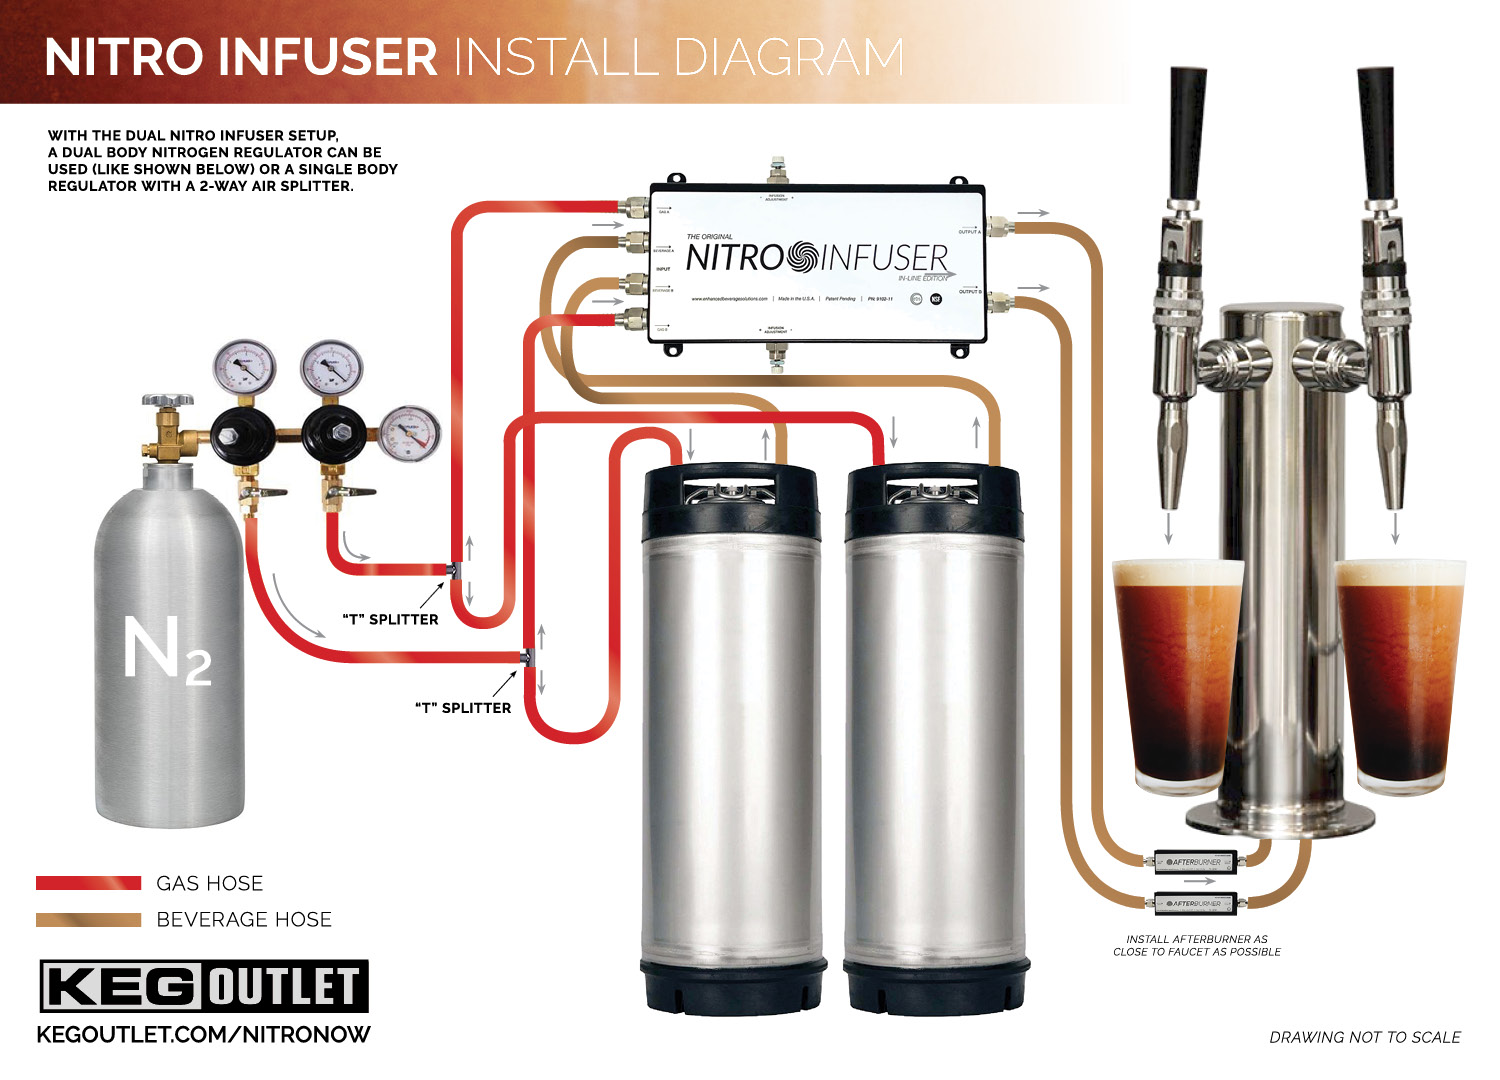 Dual Nitro Infuser with AfterBurners Installation Diagram